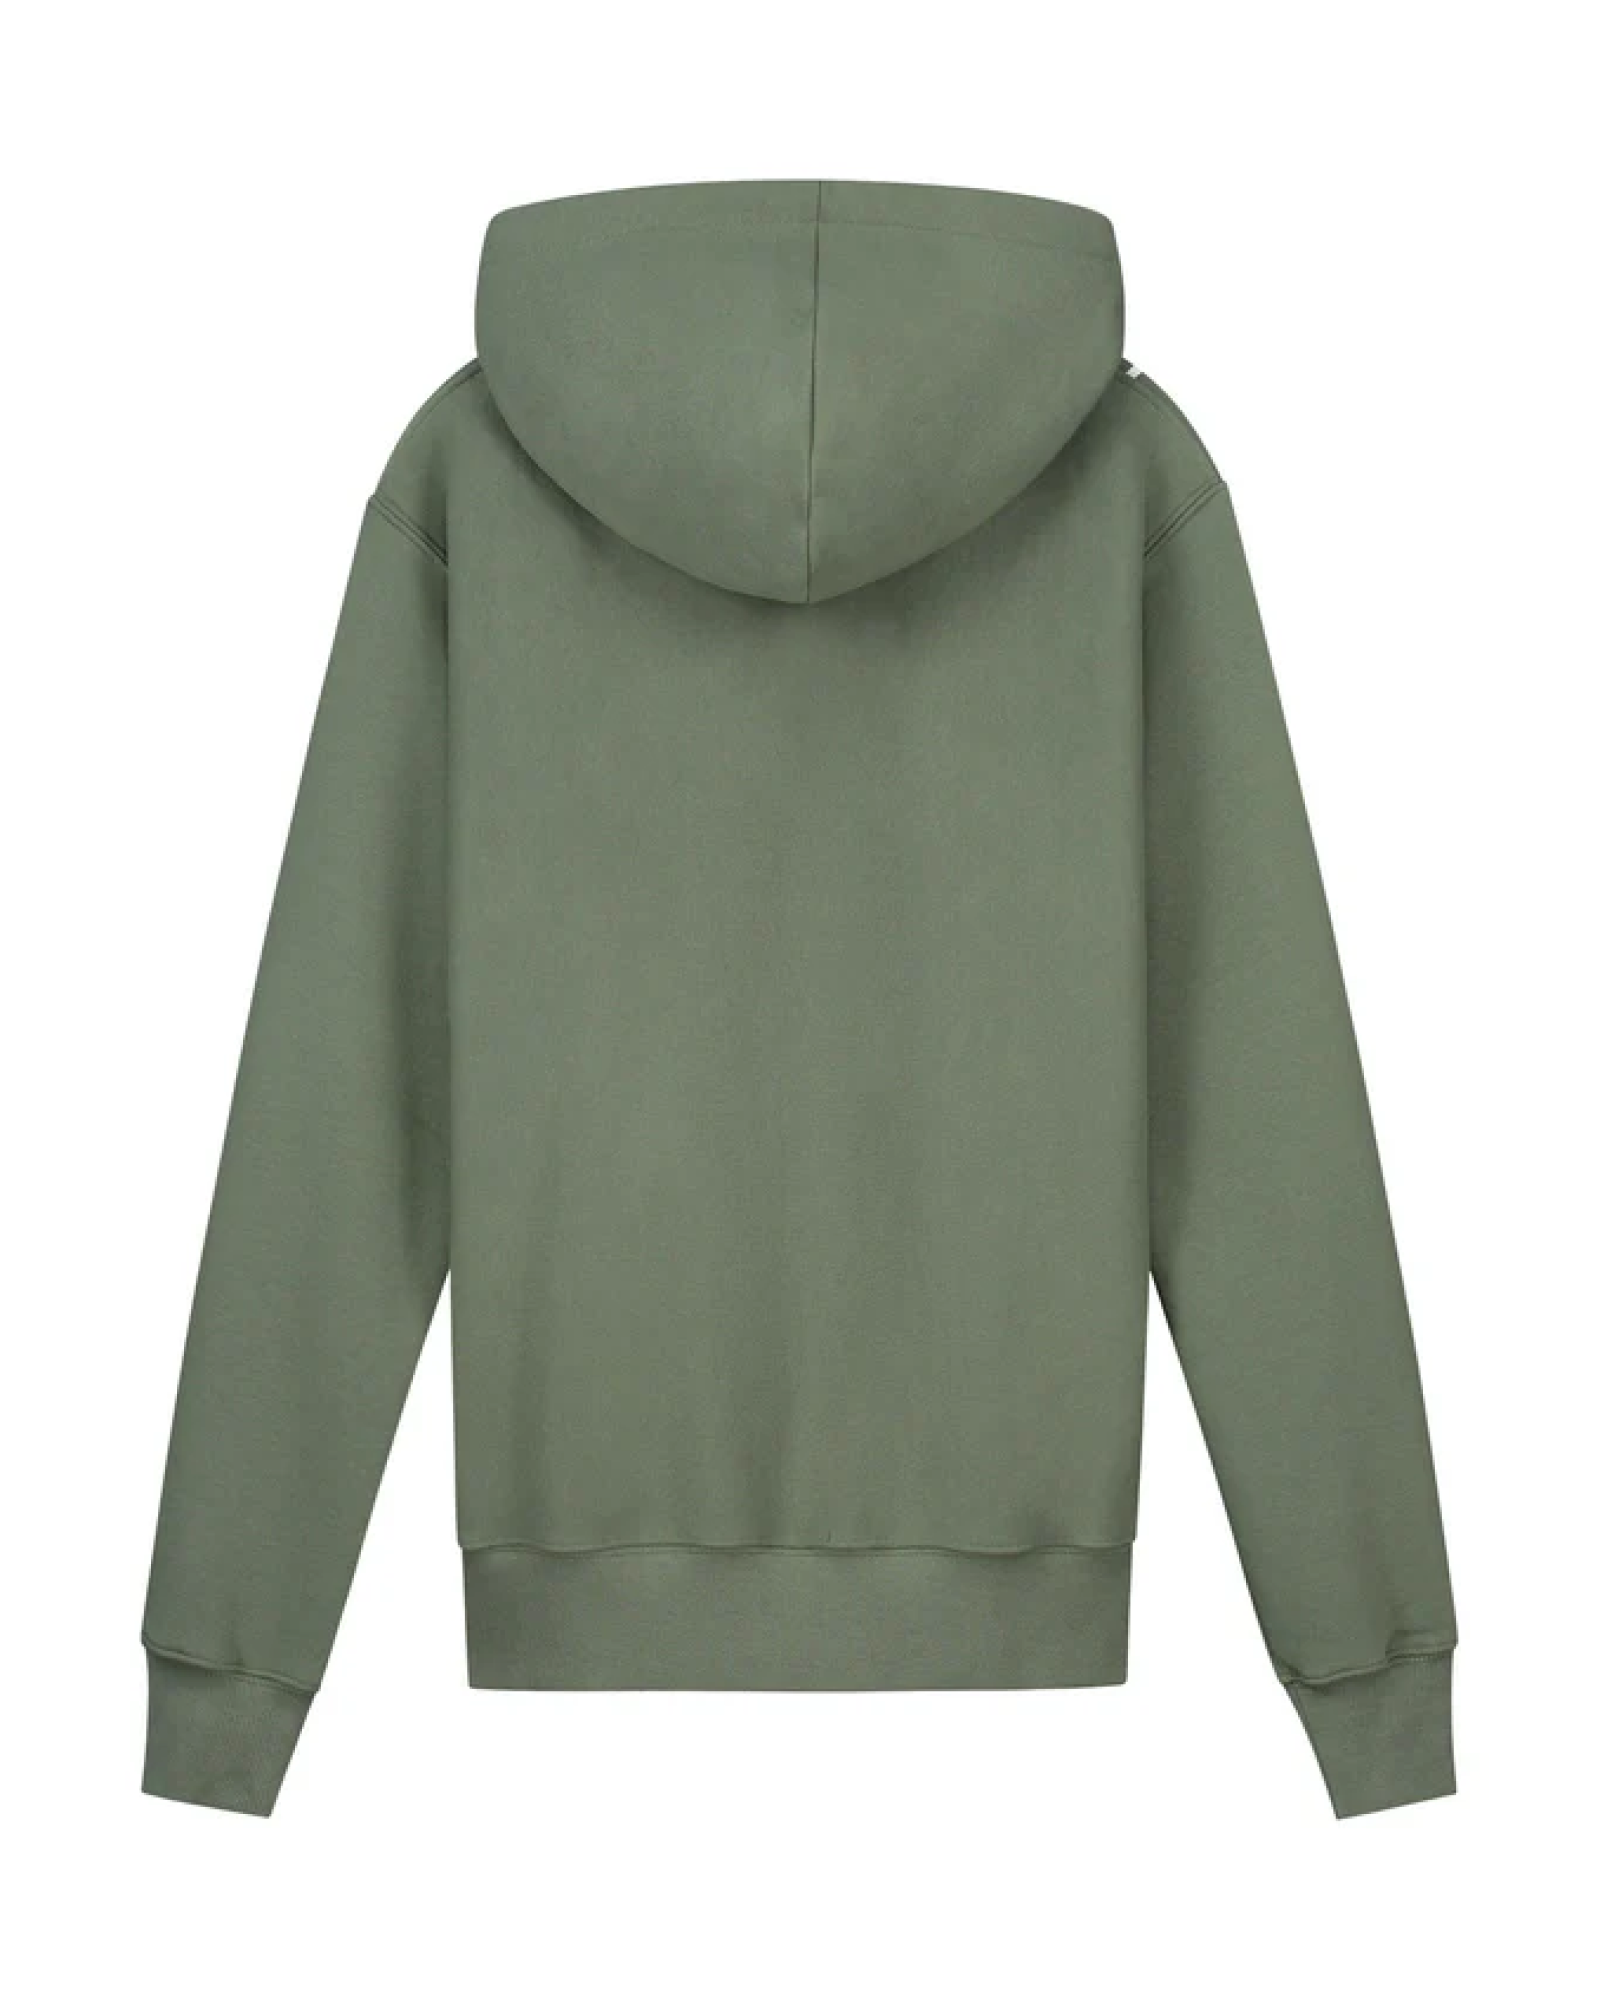 CTL Hoodie Forest Green